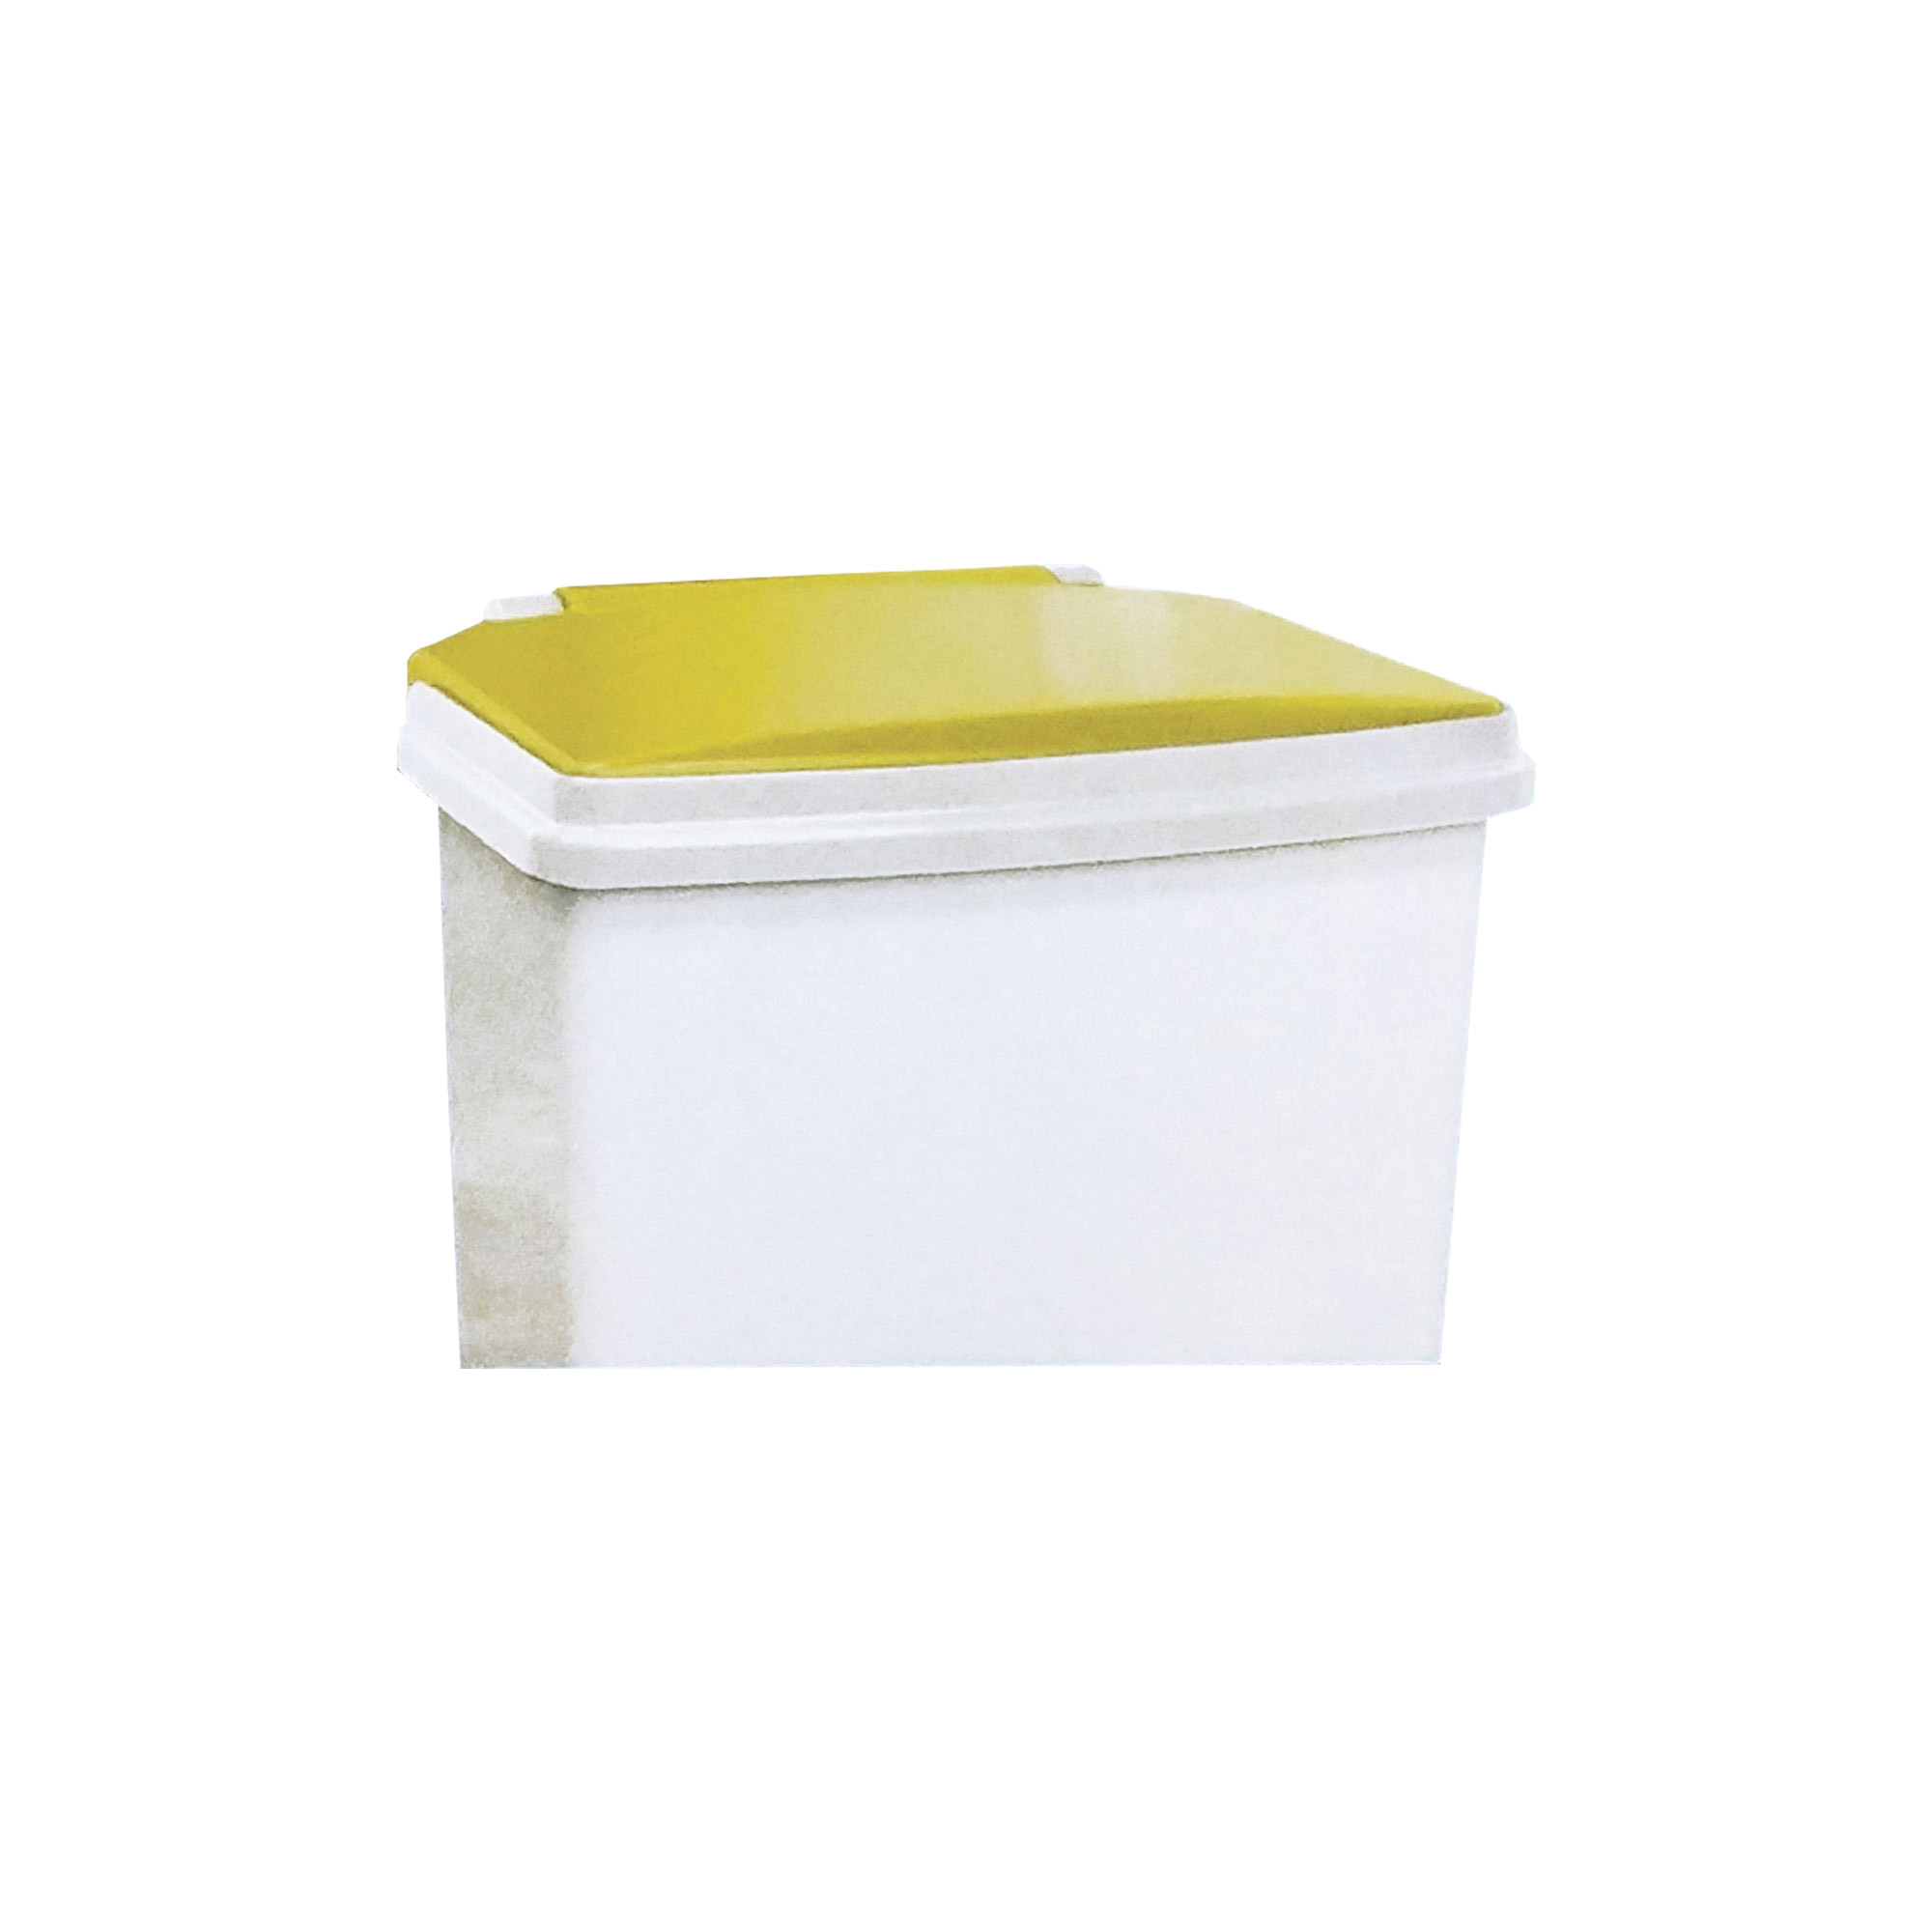 Yellow Replacement Lid For EB-3296 & EB-3297